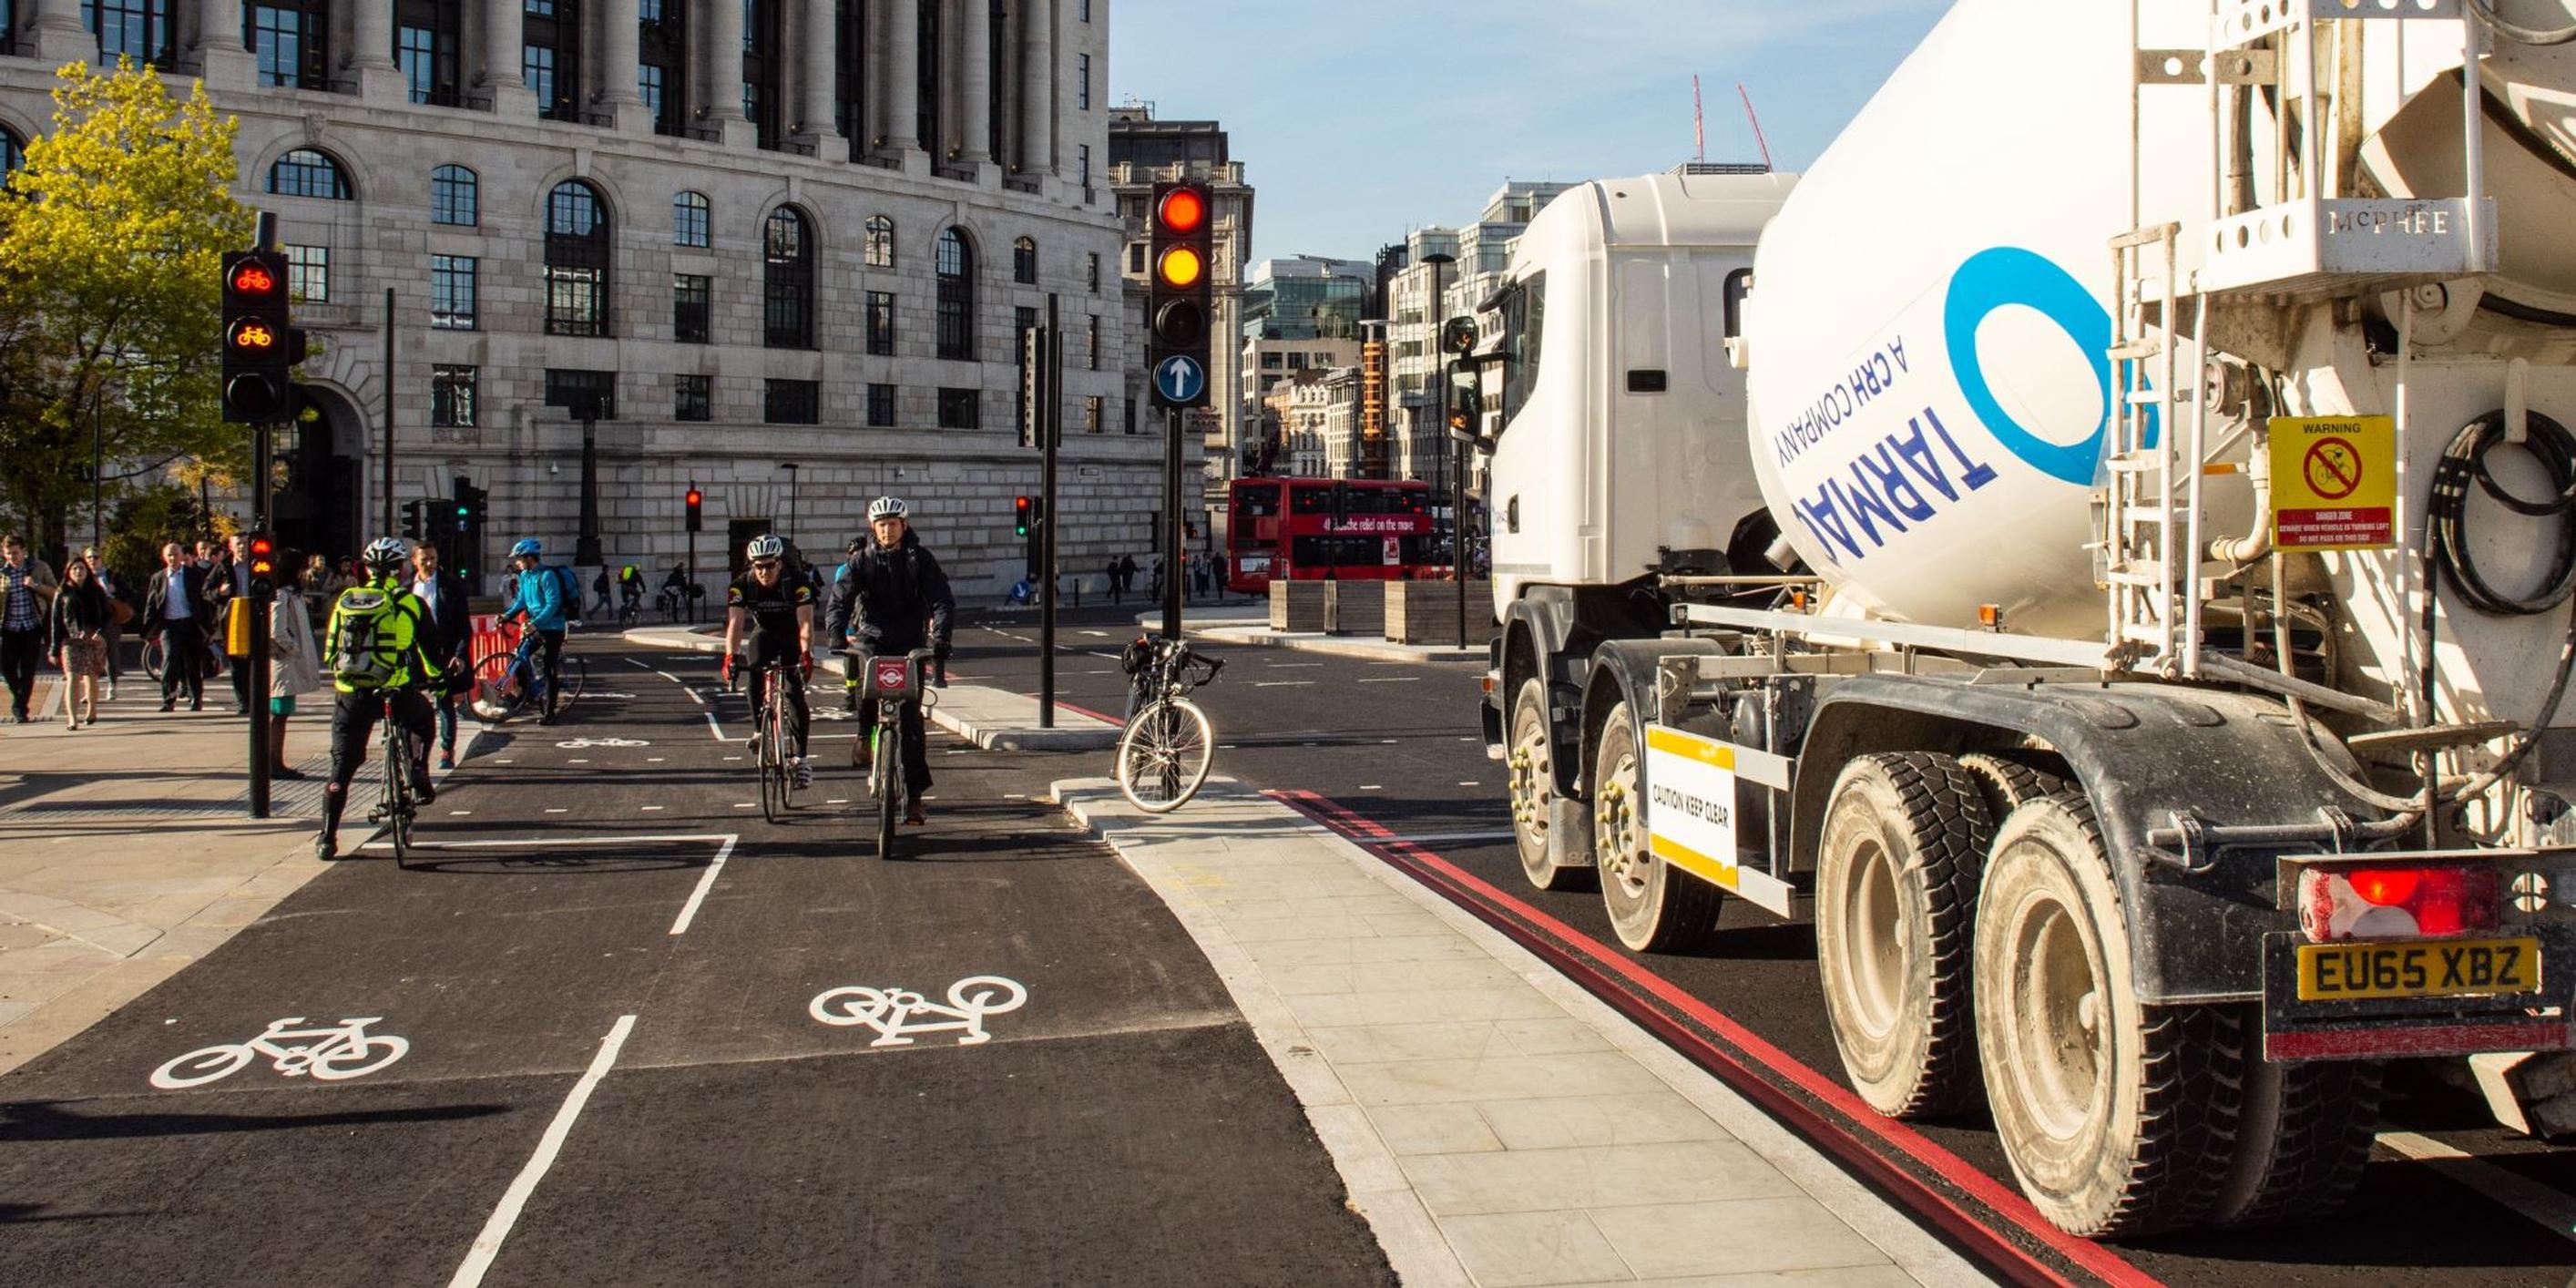 A fifth of cyclists who were previously using dedicated and segregated cycle lanes have now moved onto the road and plan to remain cycling on the street